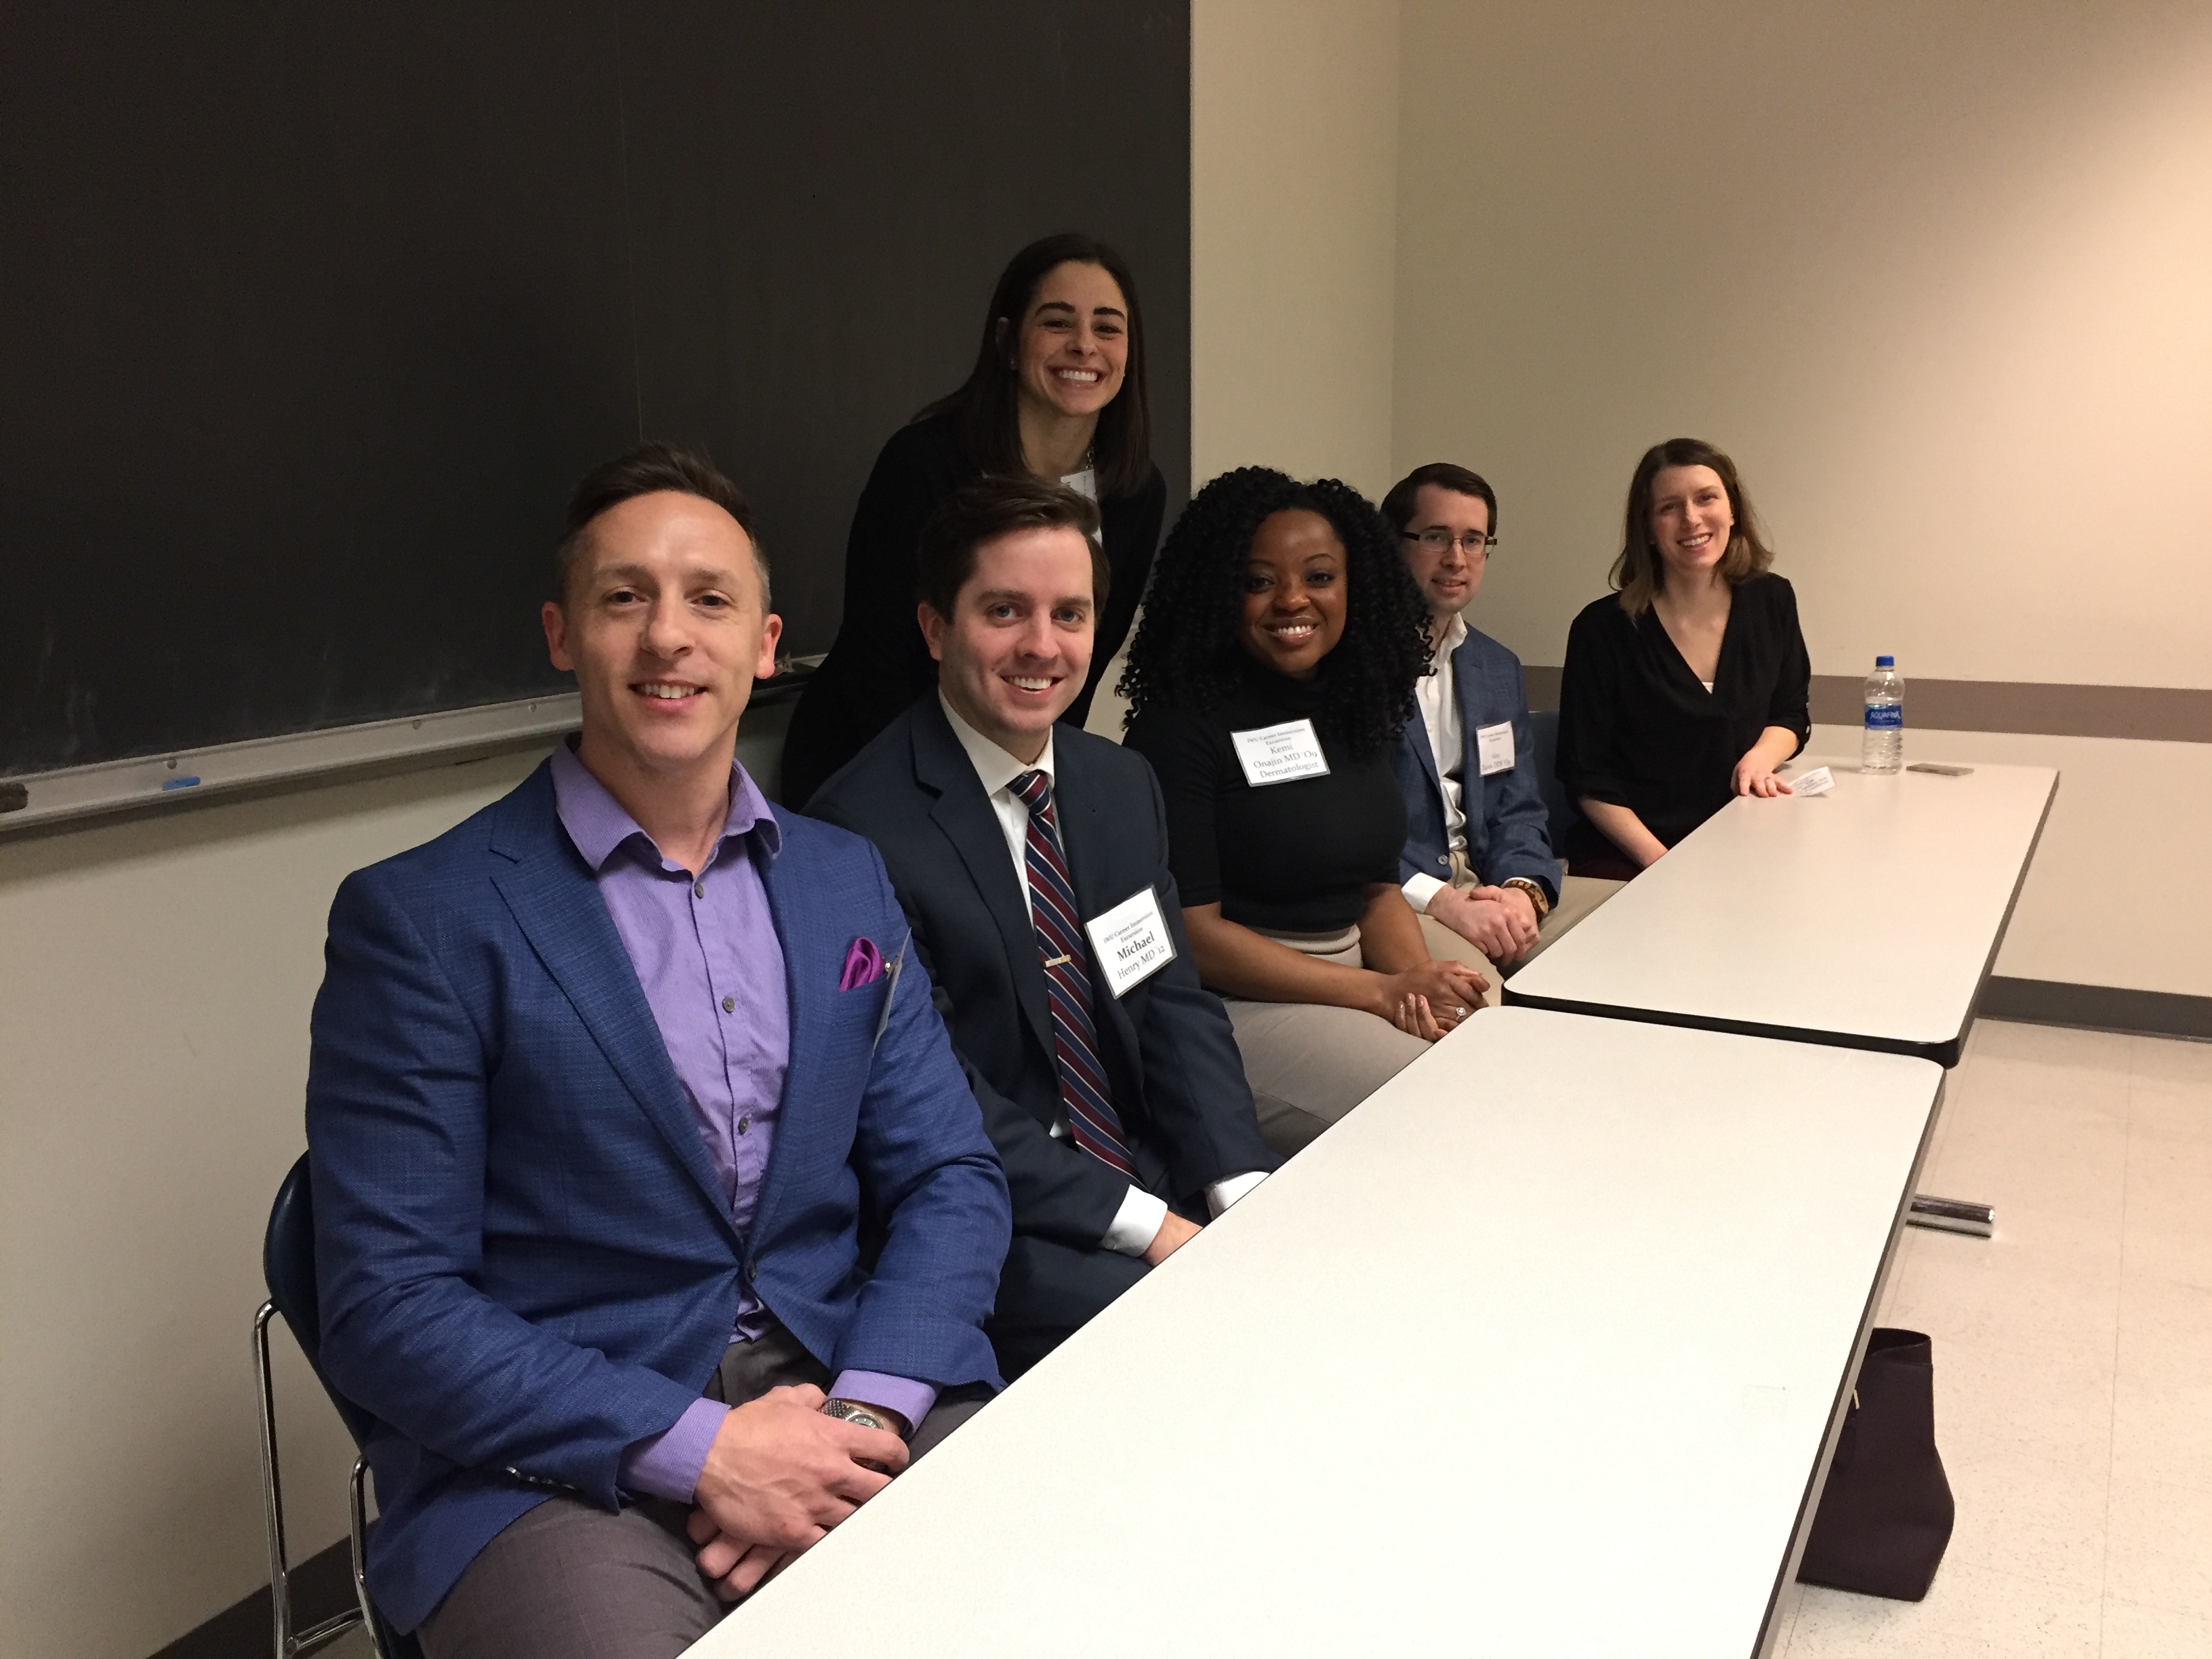 Professional practice panelists share their insights and tips with CIE participants